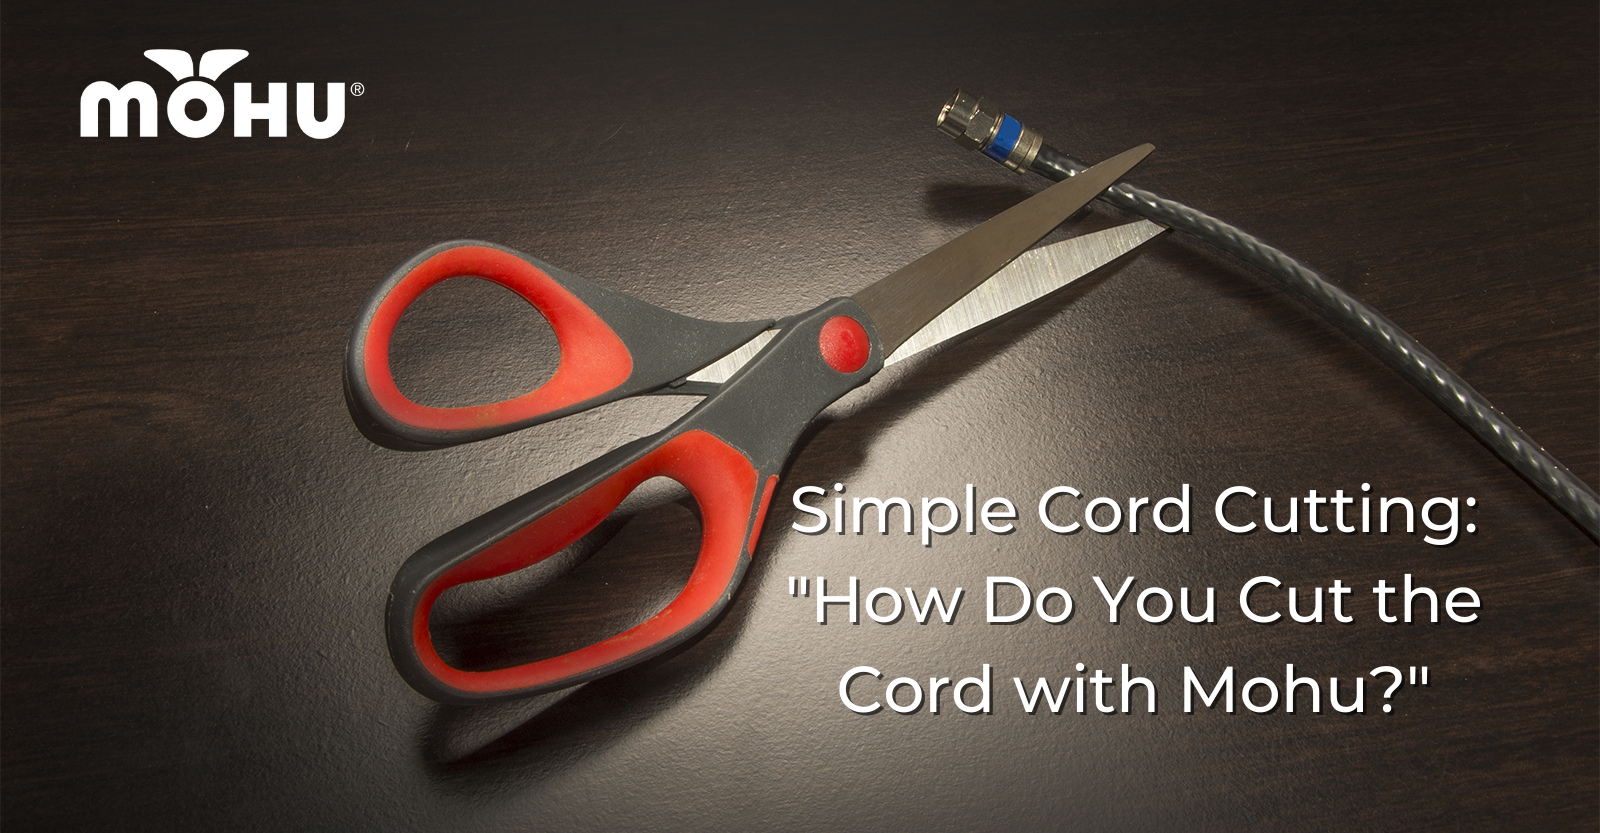 Scissors on a table cutting a coax cable, Simple Cord Cutting How Do You Cut the Cord with Mohu